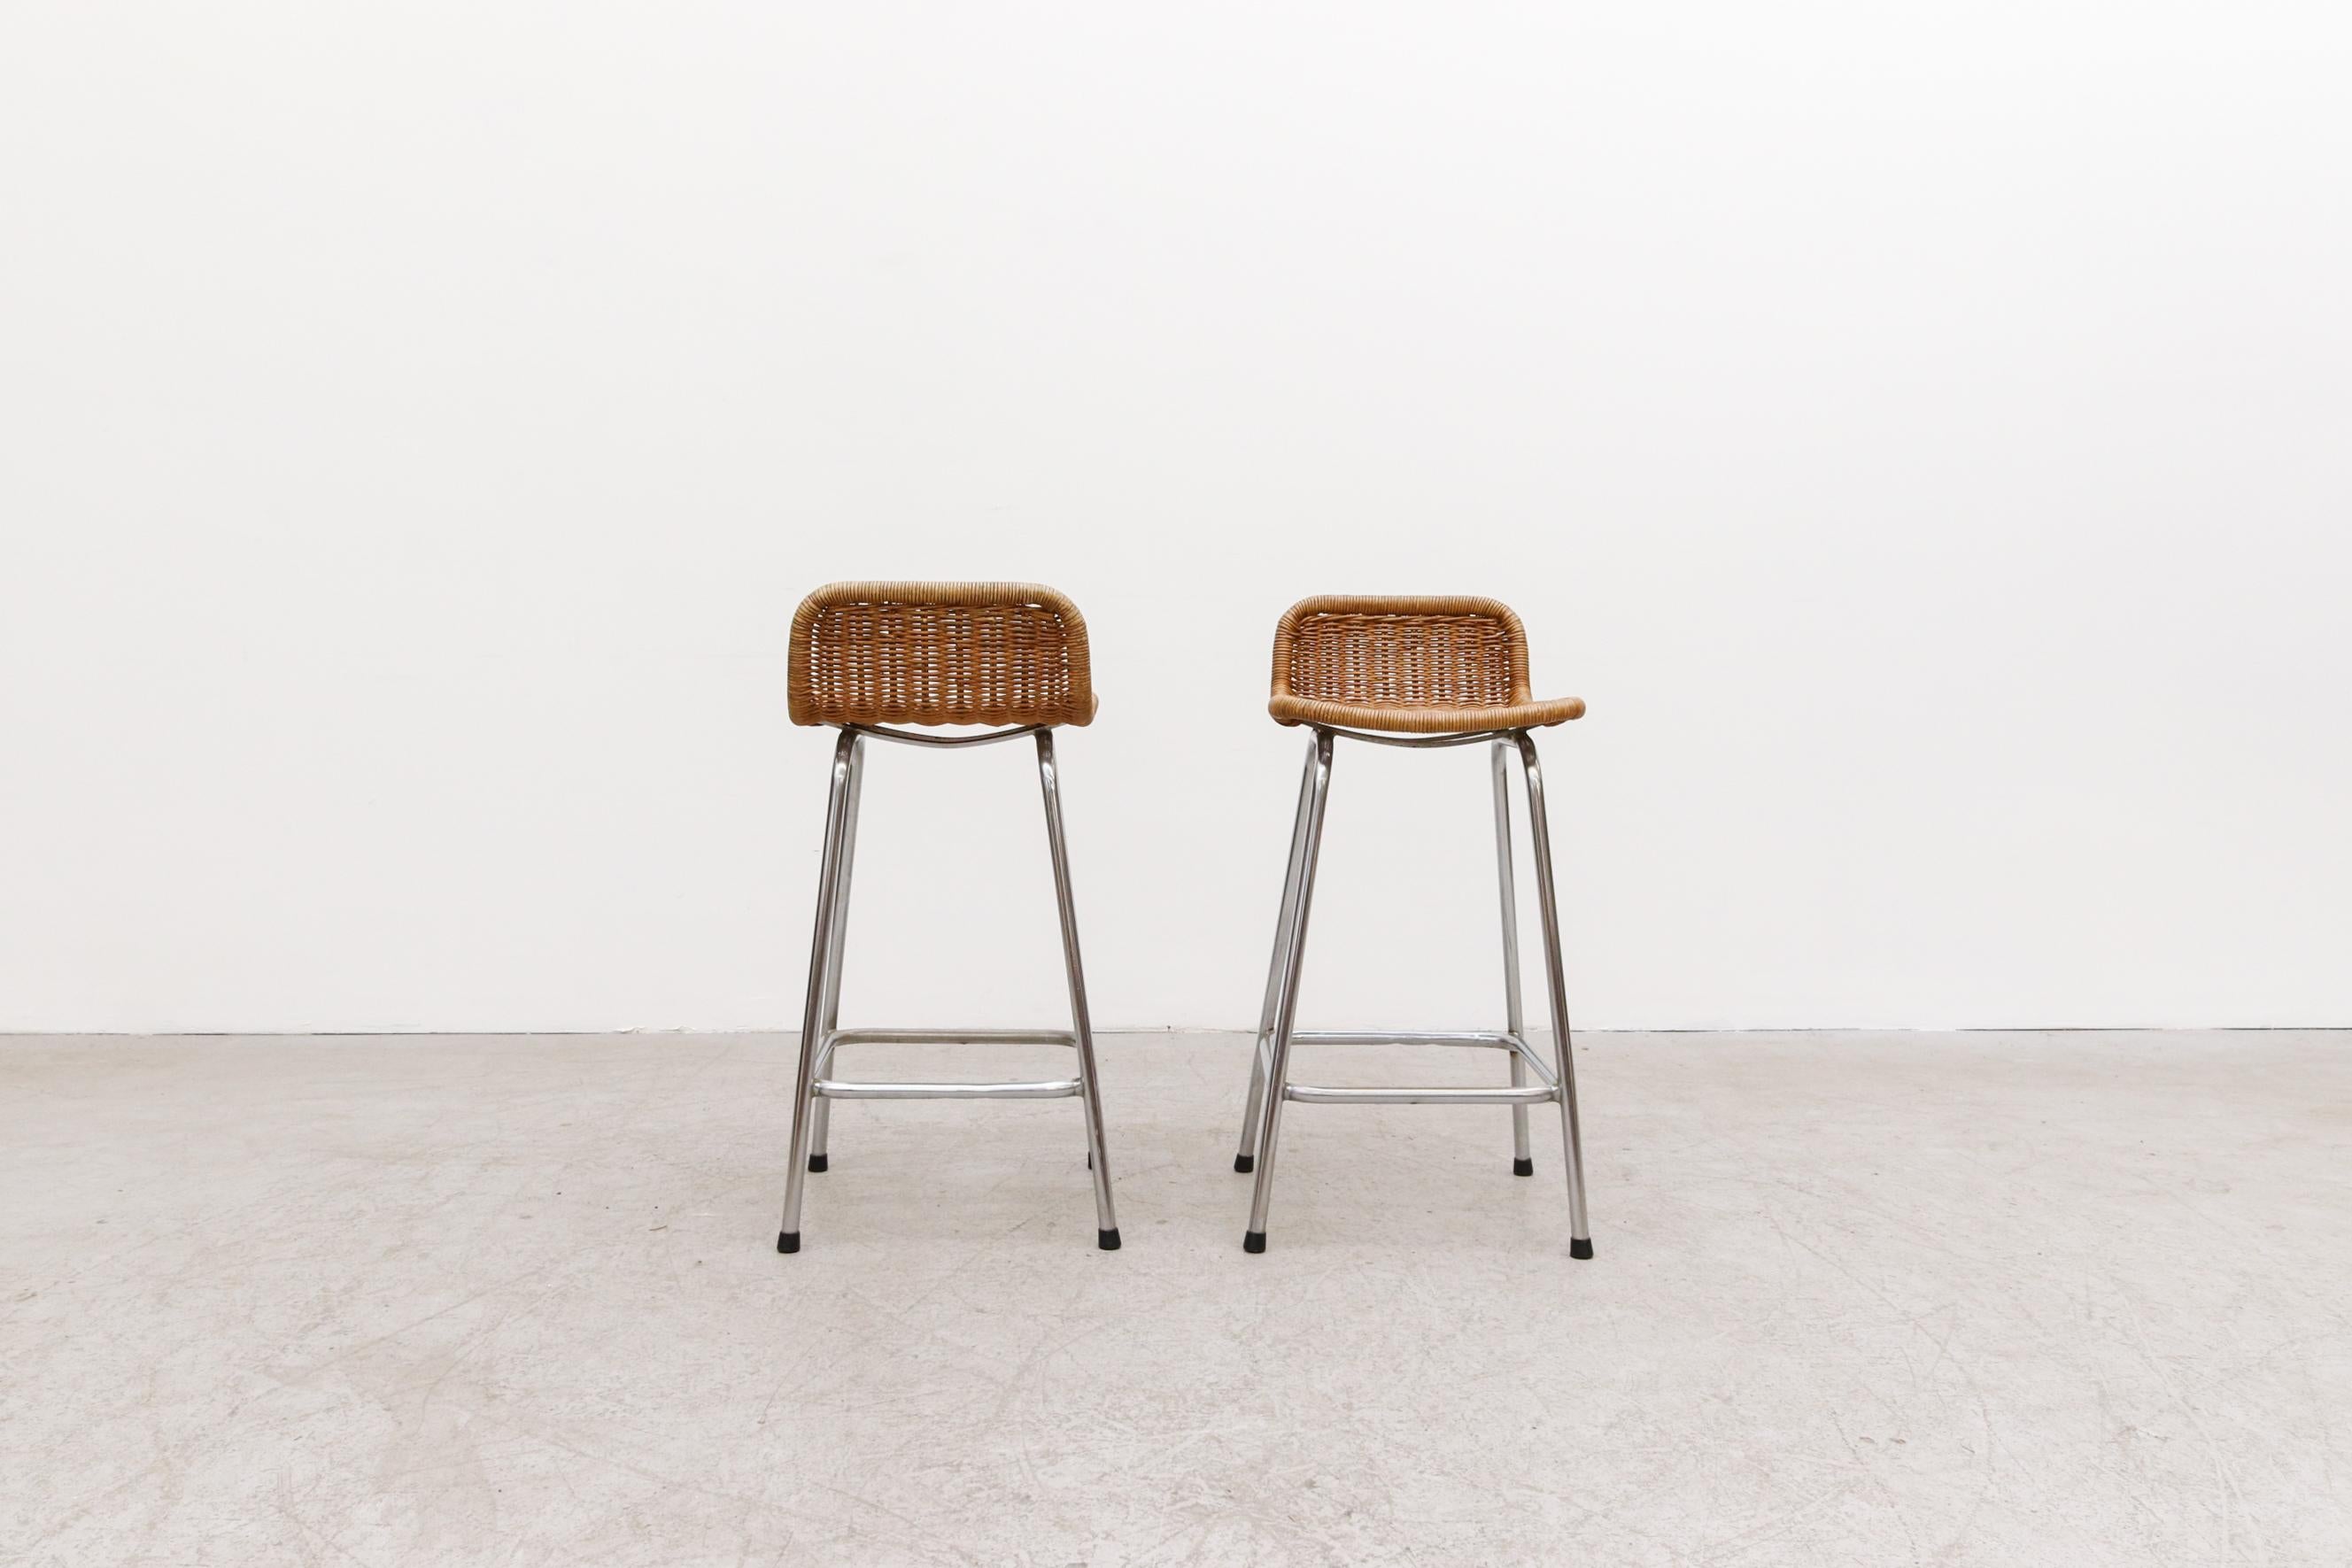 Handsome pair of Charlotte Perriand style wicker bar or counter stools. Minor repairs, otherwise in good original condition. Wear is consistent with its age and use. Seat height is 24